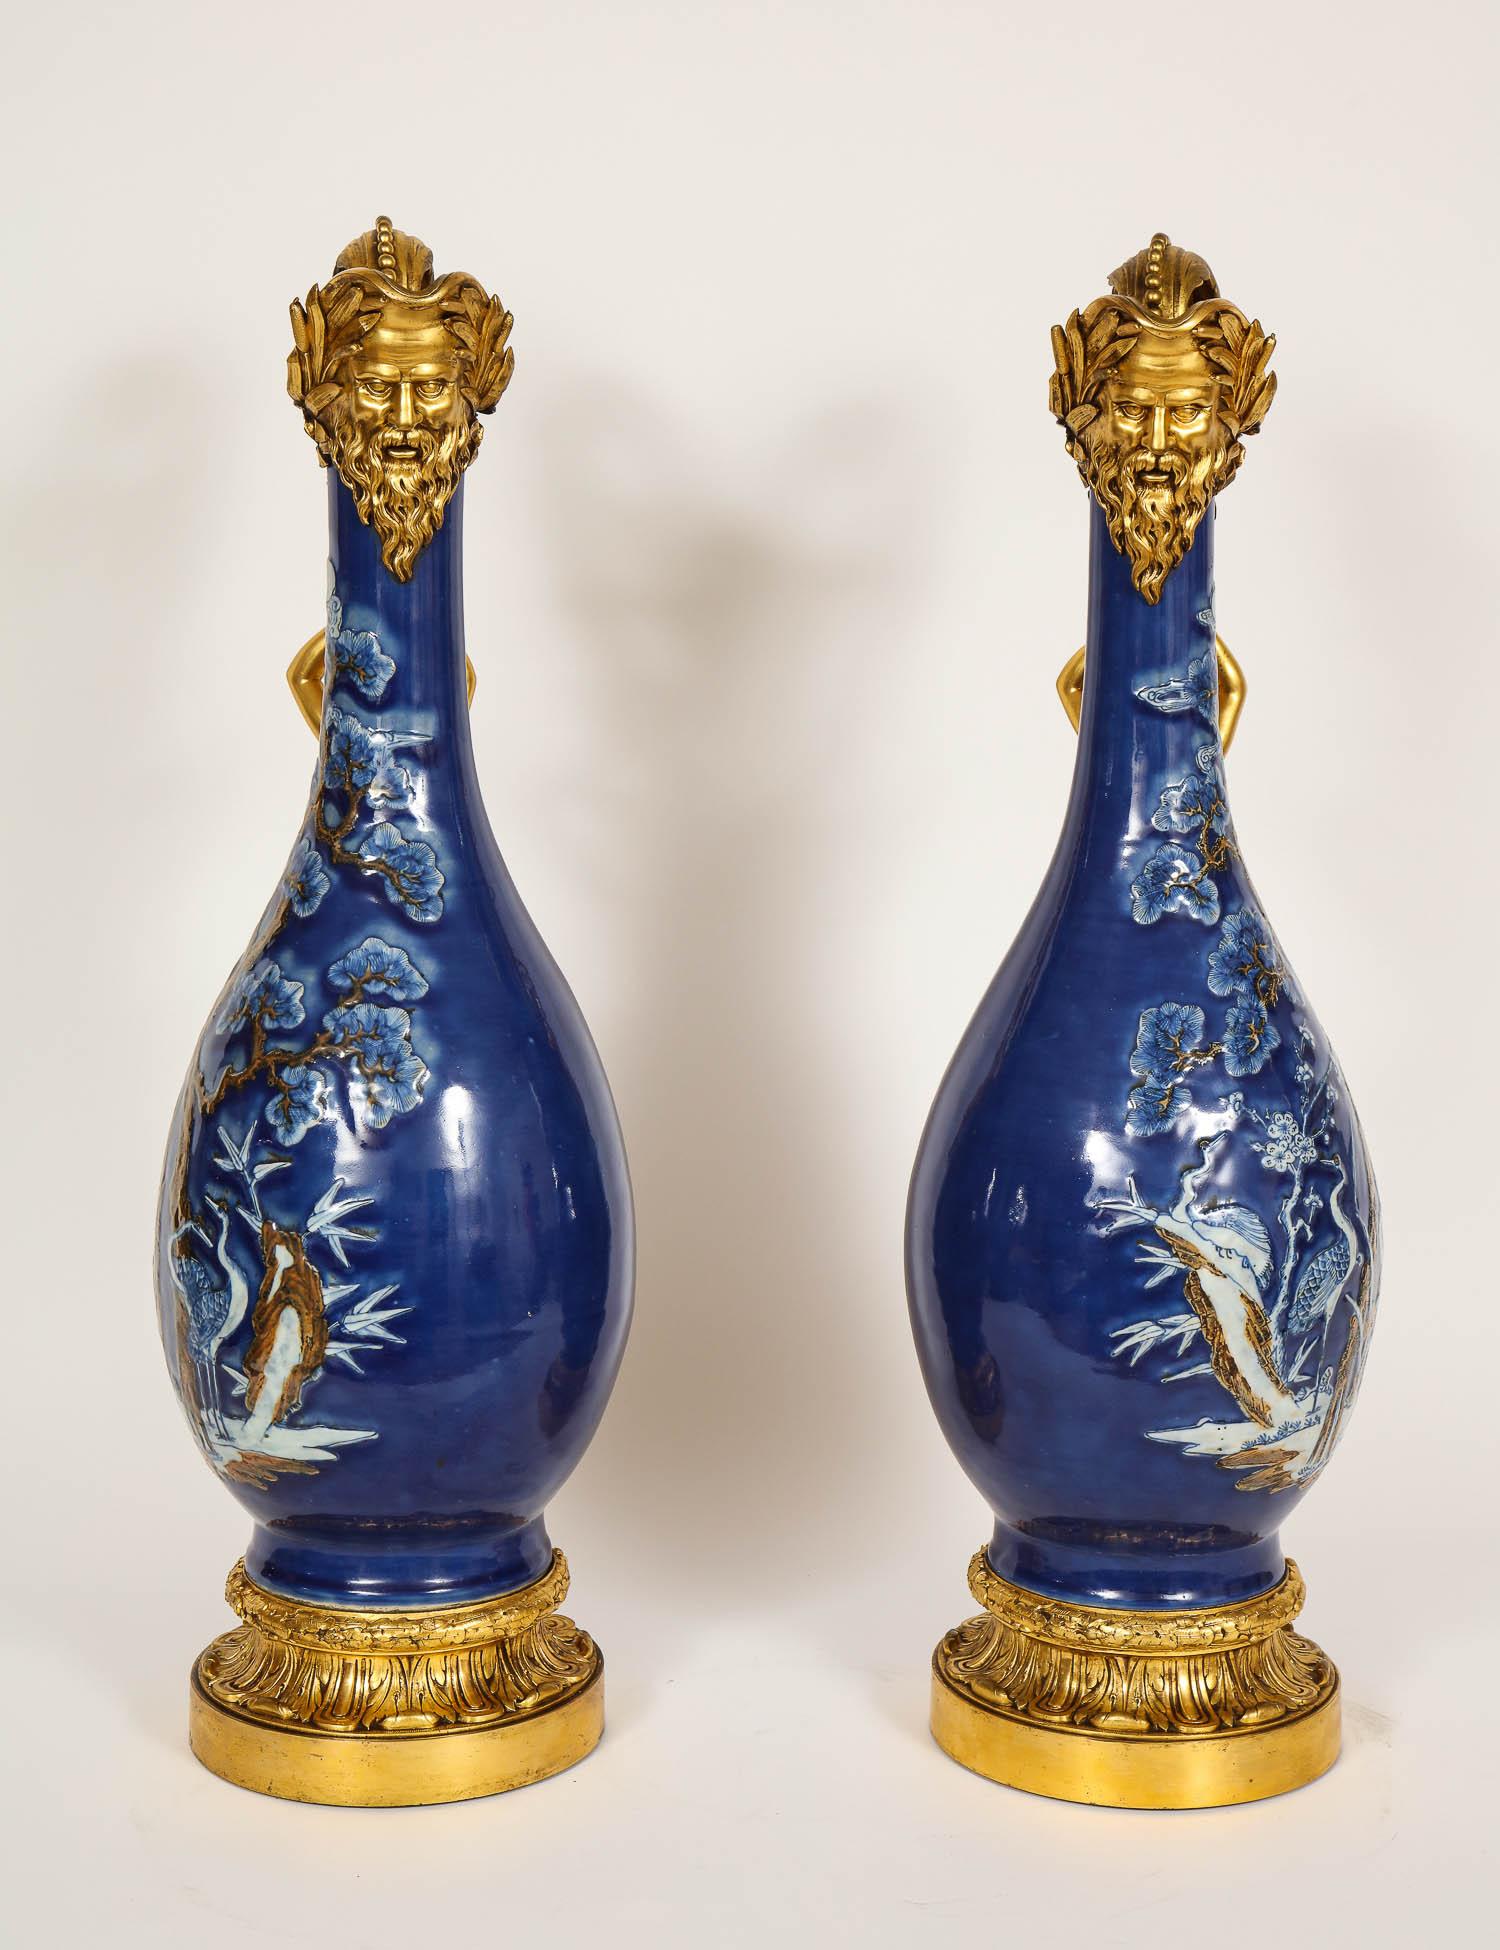 Pair of French Louis XVI Style Ormolu Mounted Chinese Export Porcelain Vases For Sale 2